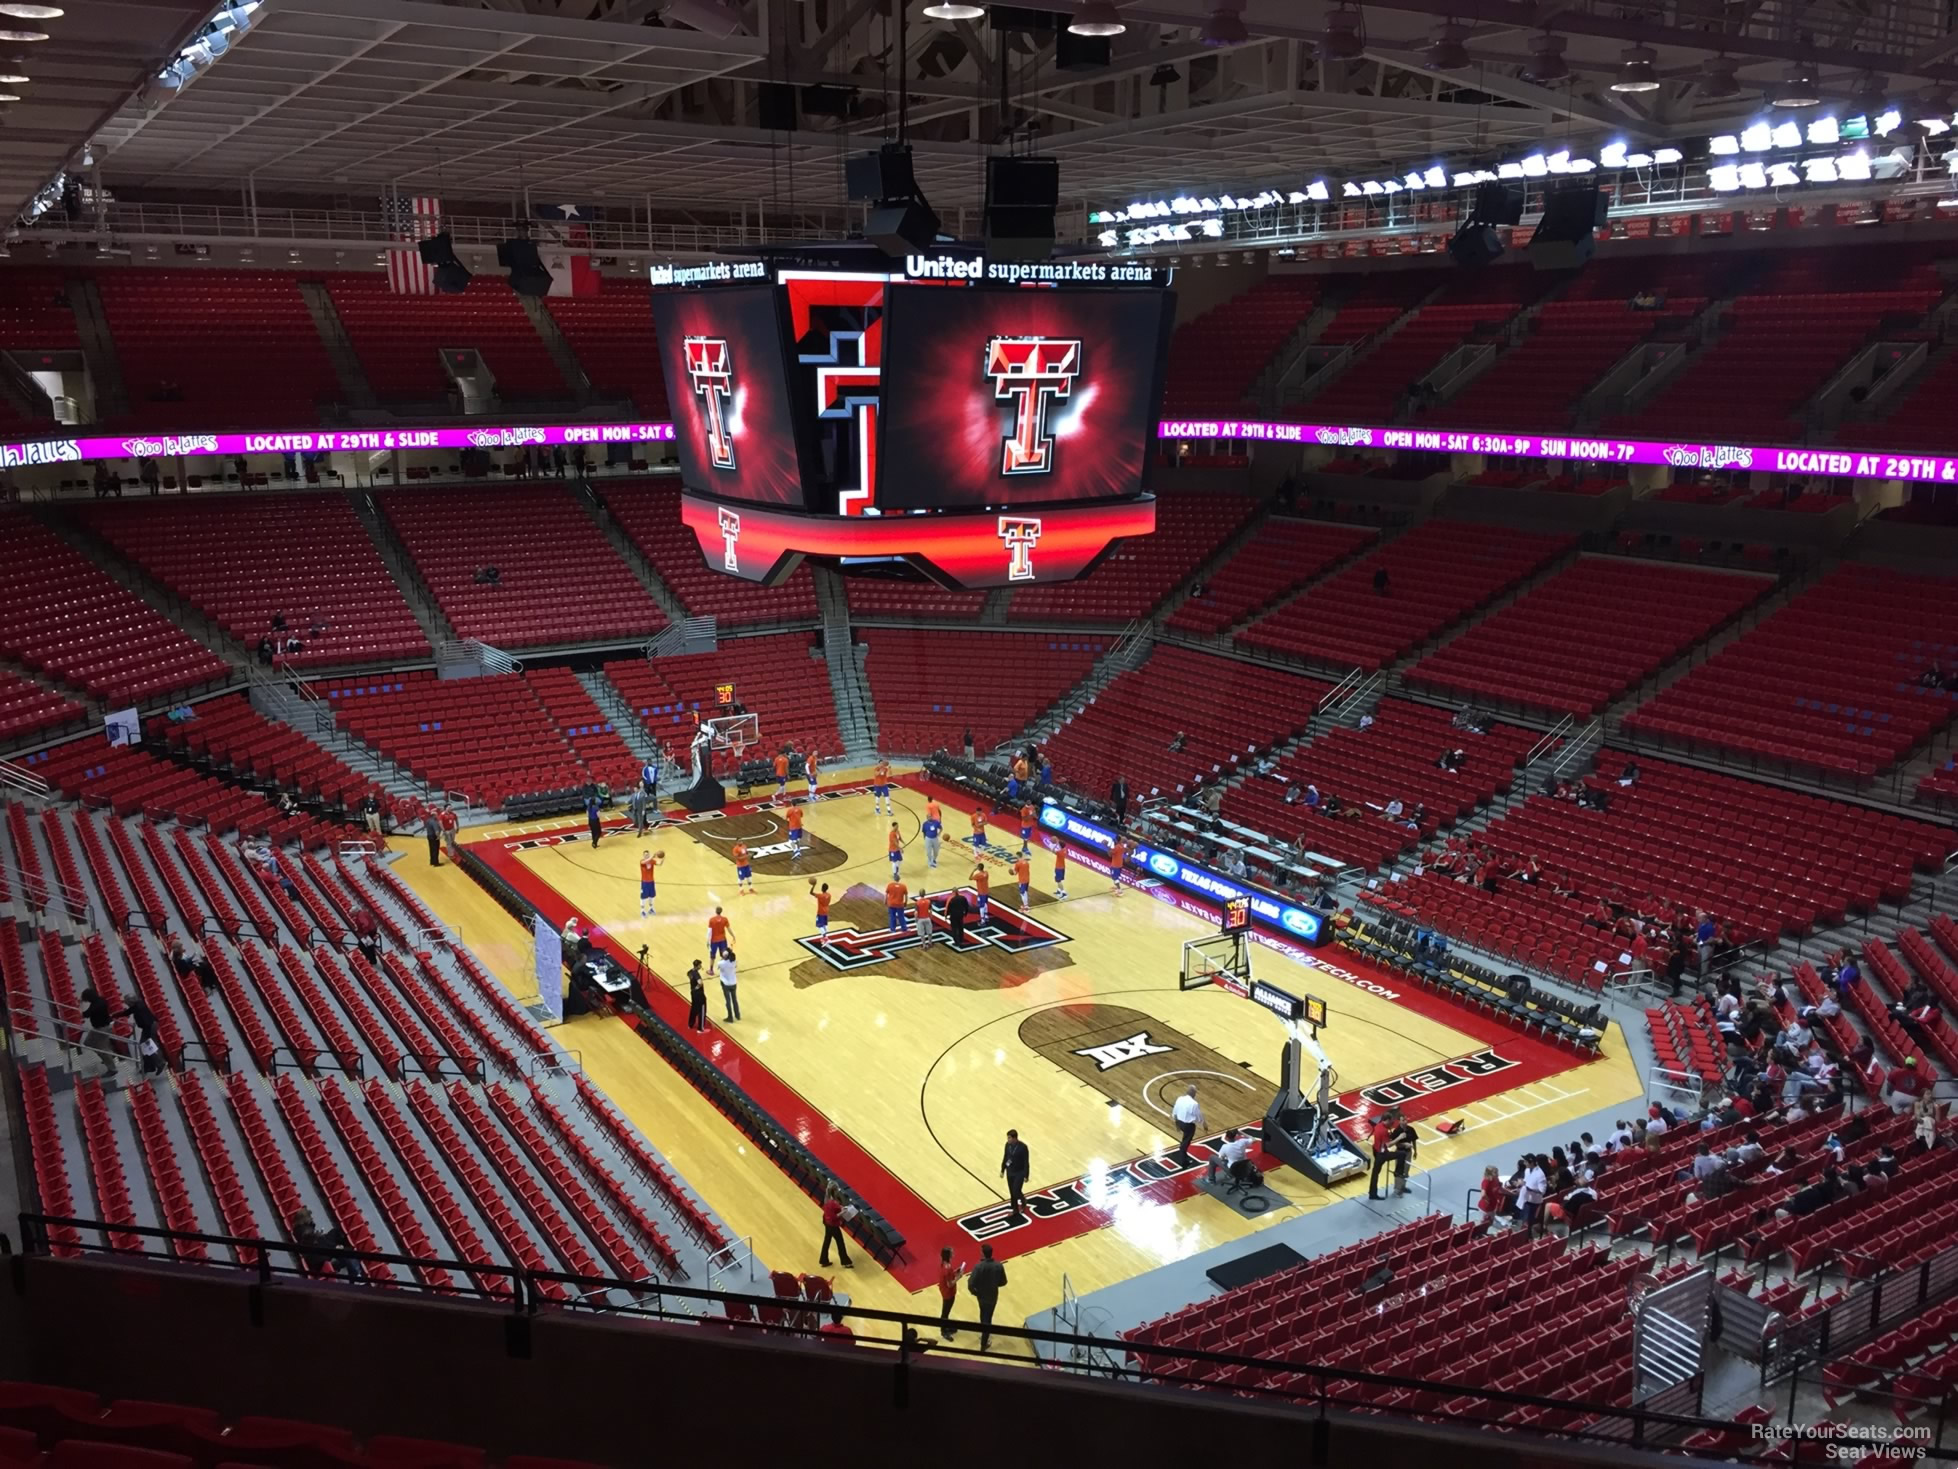 section 228, row 7 seat view  - united supermarkets arena